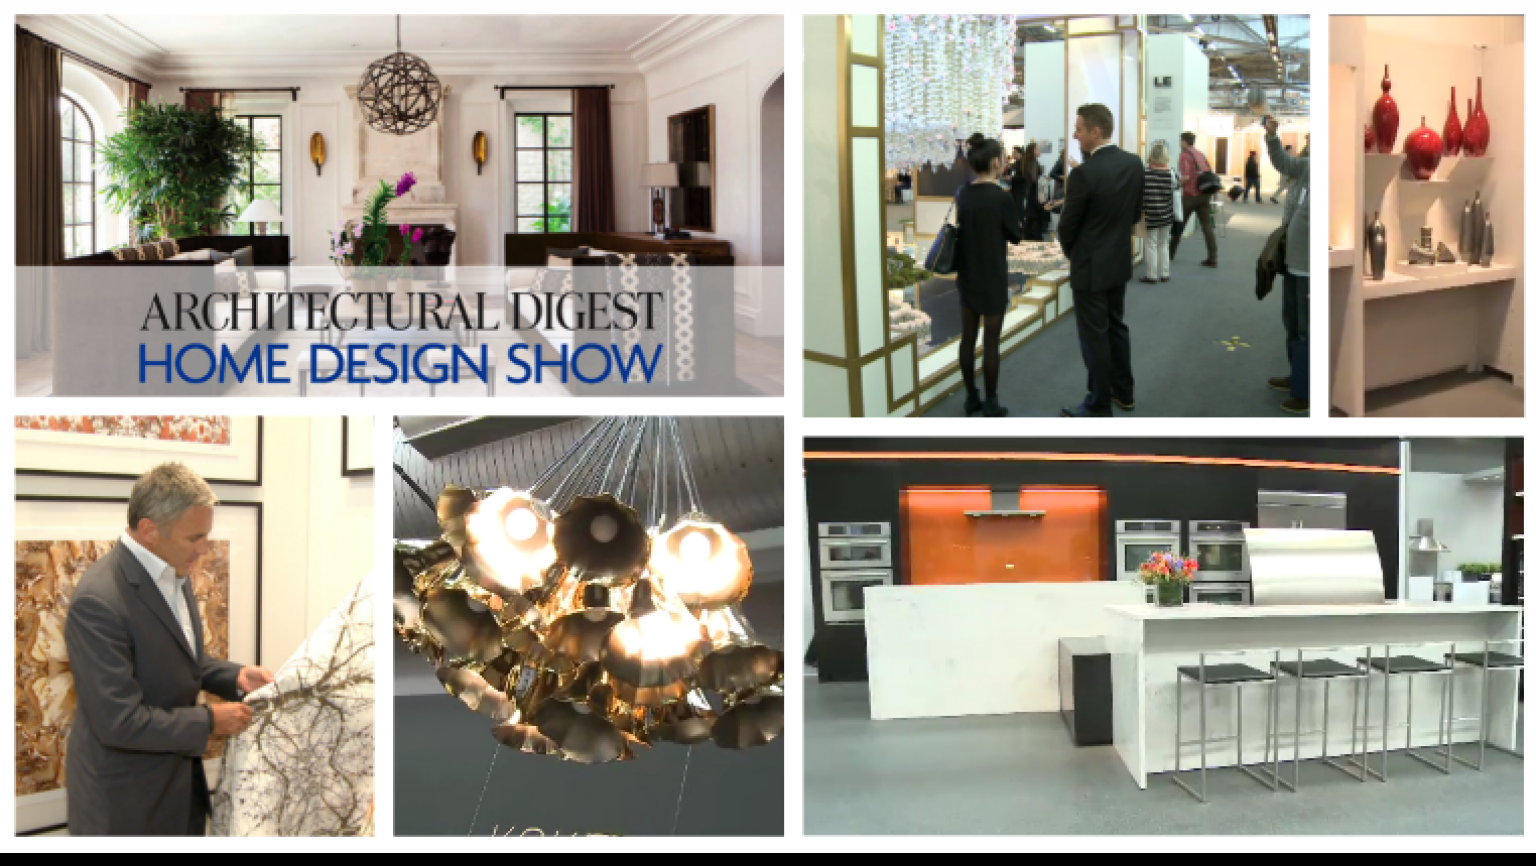 The 13th Annual Architectural Digest Home Design Show LifeMinute.tv